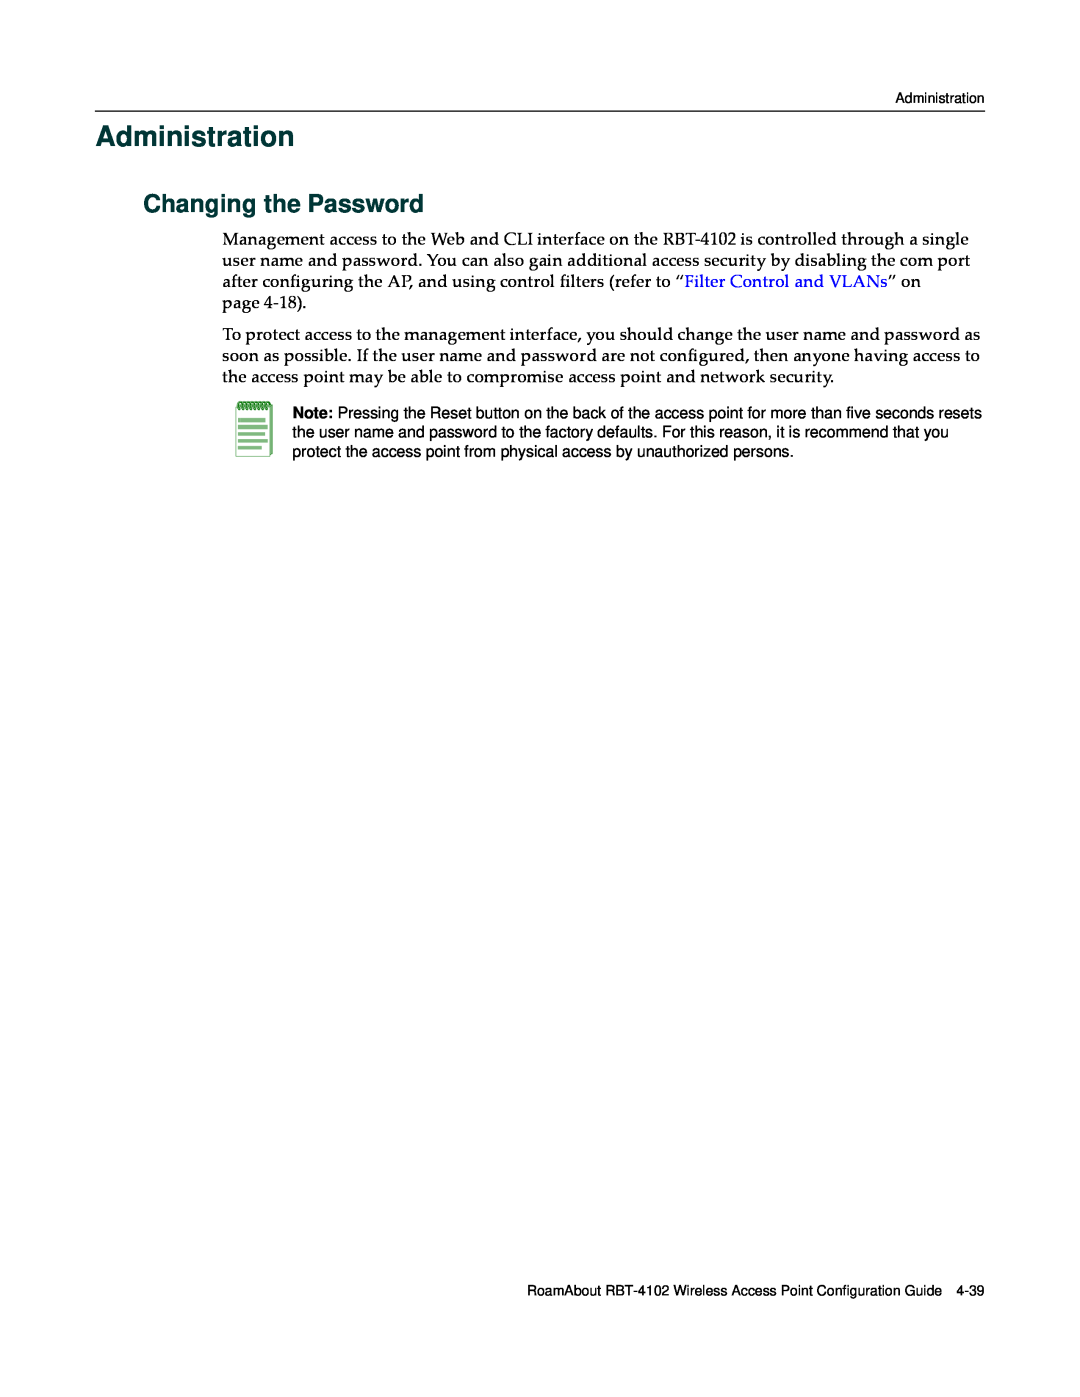 Enterasys Networks RBT-4102 manual Administration, Changing the Password 